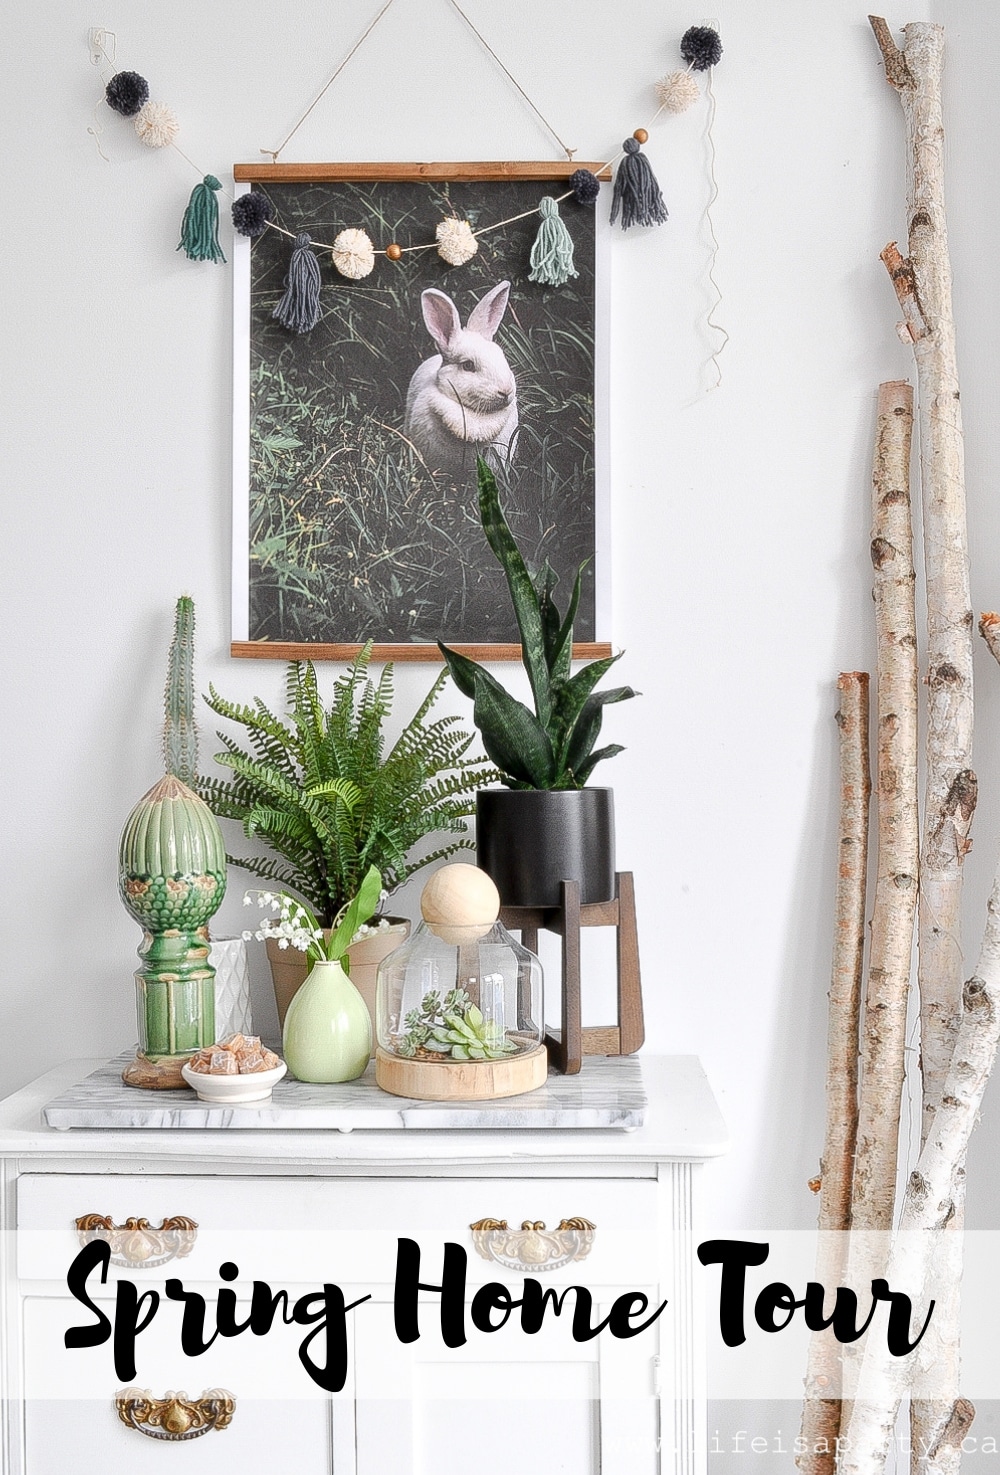 Spring Home Tour: black, white and green decor for spring including lots and lots of plants, flowers, vintage and Easter touches.